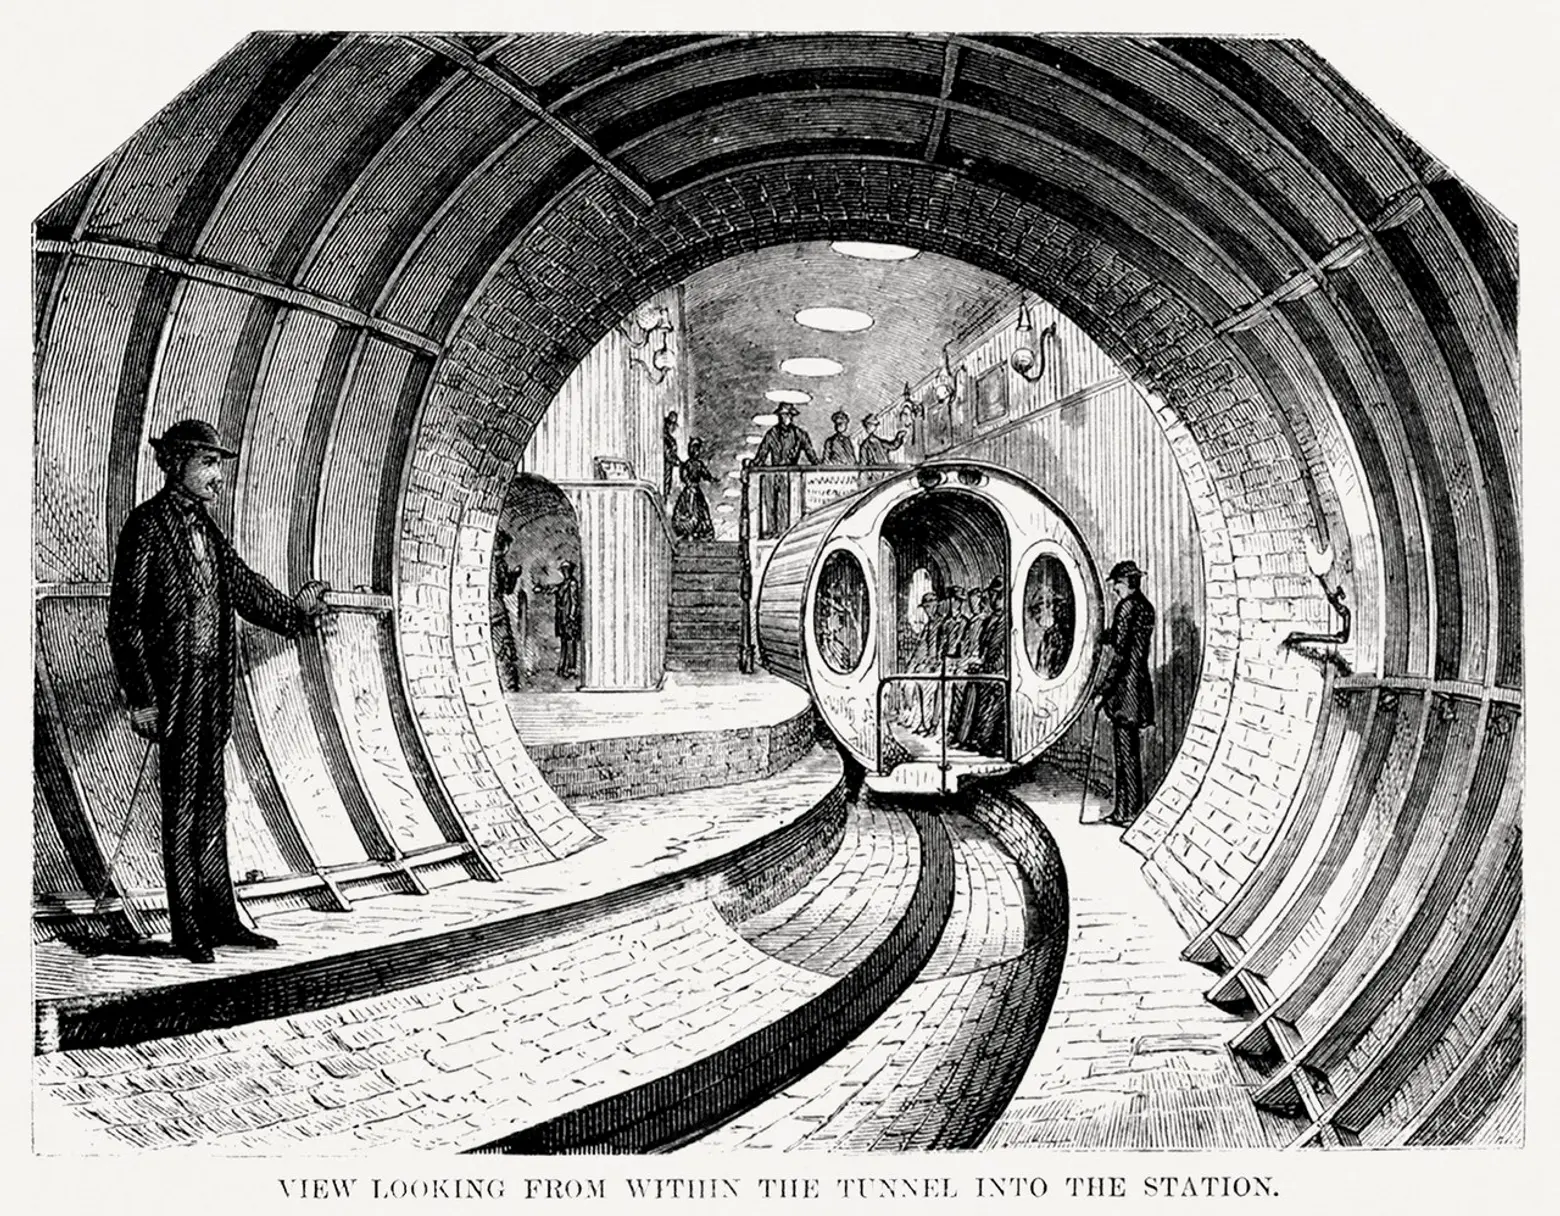 NYC’s first subway was a pneumatic tube that moved passengers one block